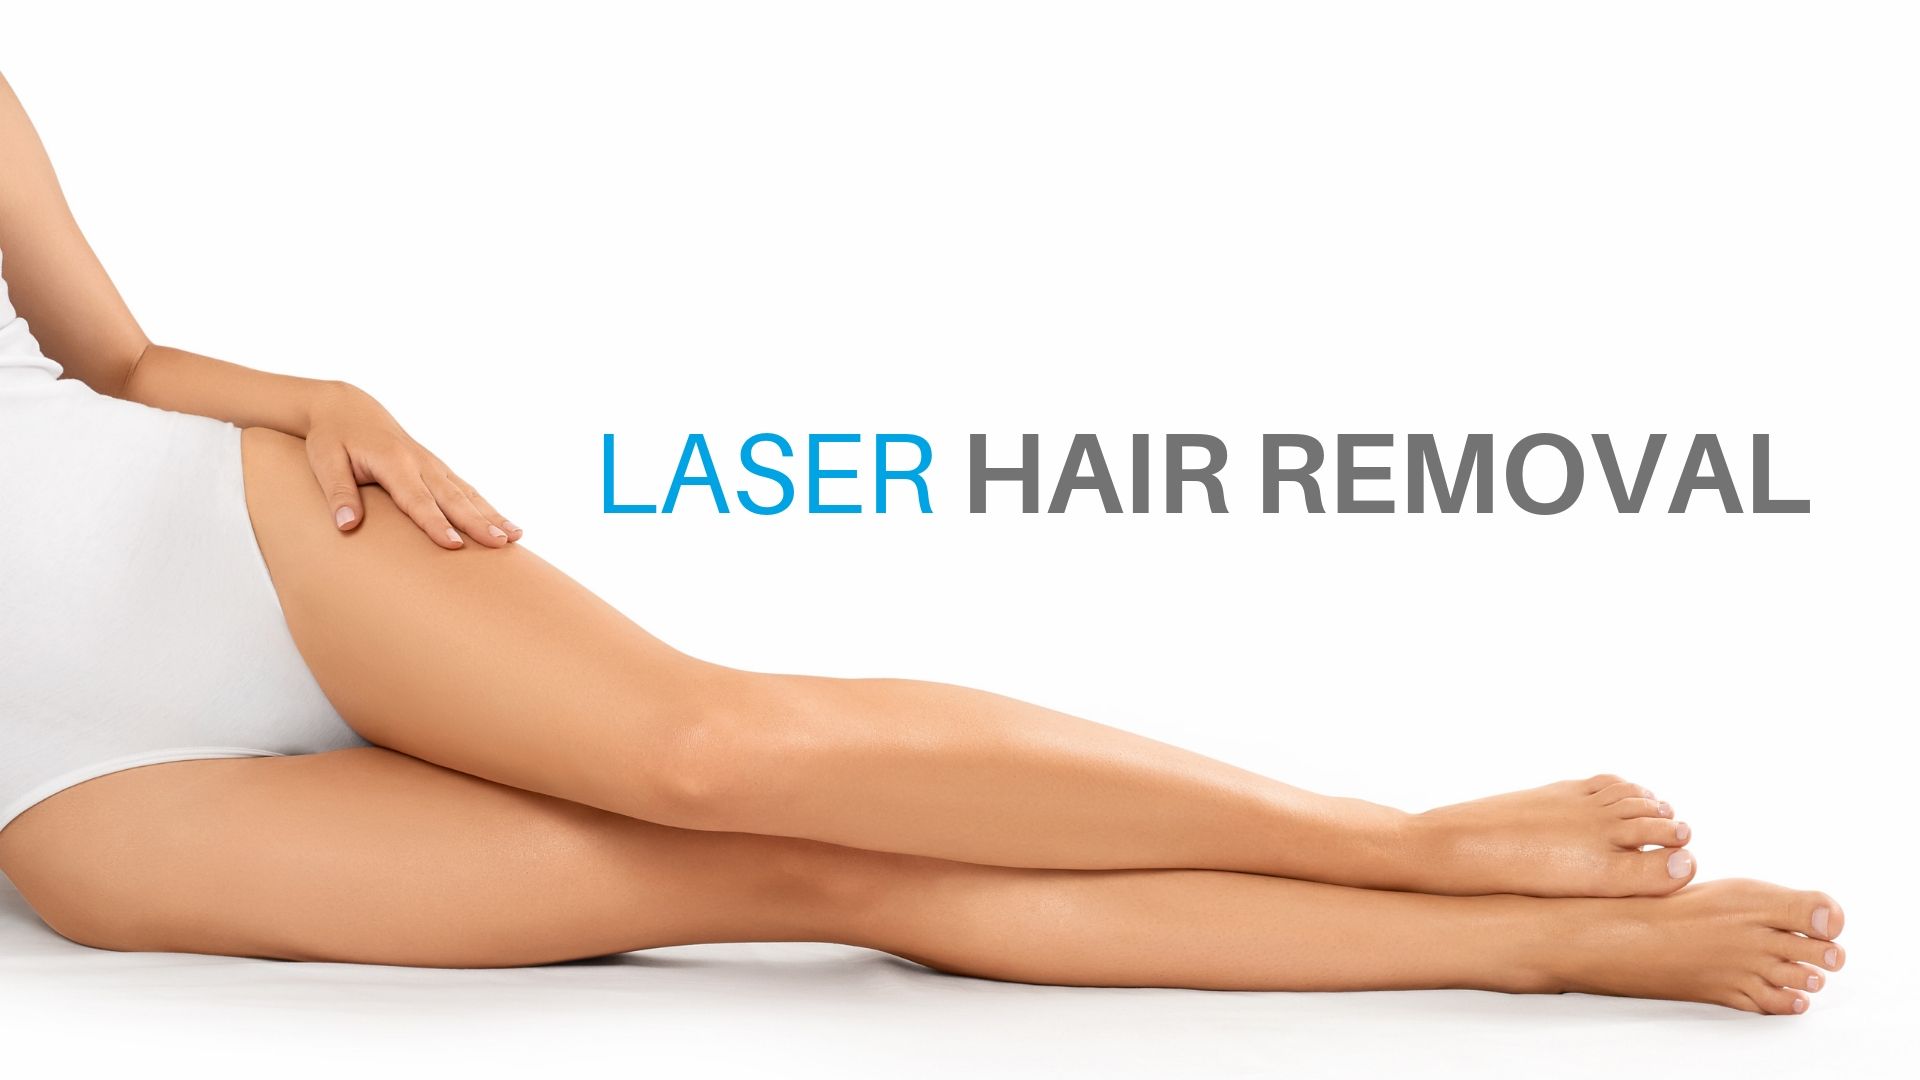 LASER HAIR REMOVAL | PERMANENT HAIR REDUCTION